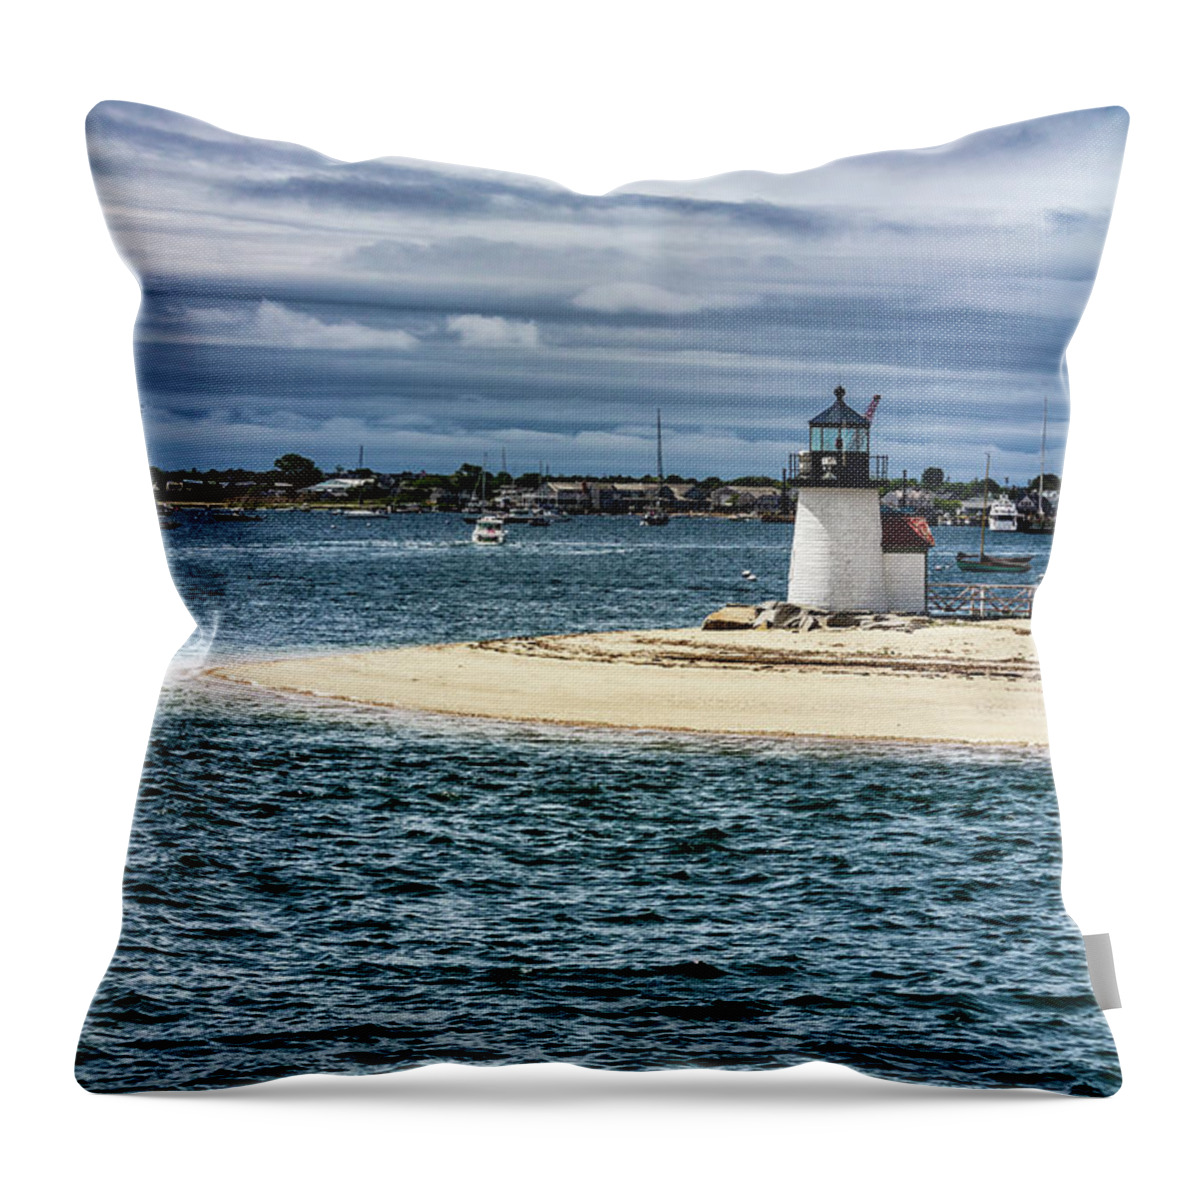 Lighthouse Artwork 7185 Throw Pillow featuring the photograph Lighthouse Artwork 7185 by Carlos Diaz